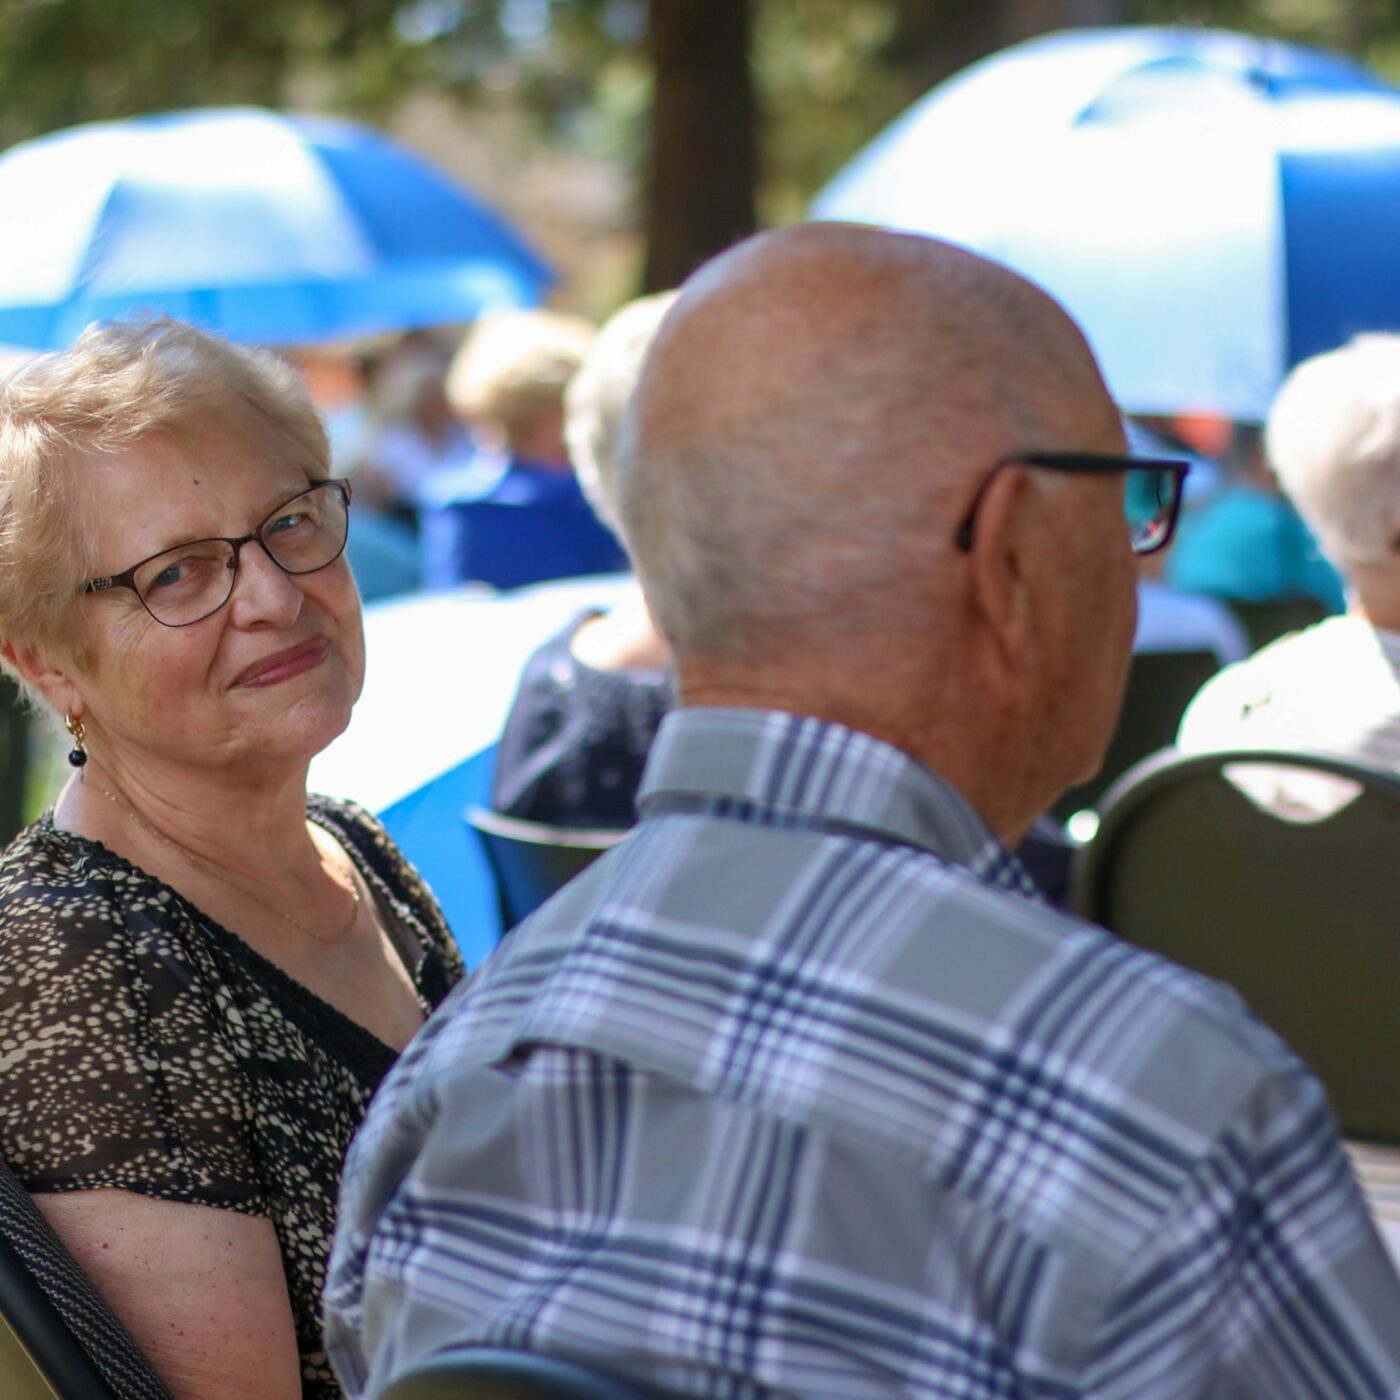 Elim Village Garrison Crossing residents at a summer event